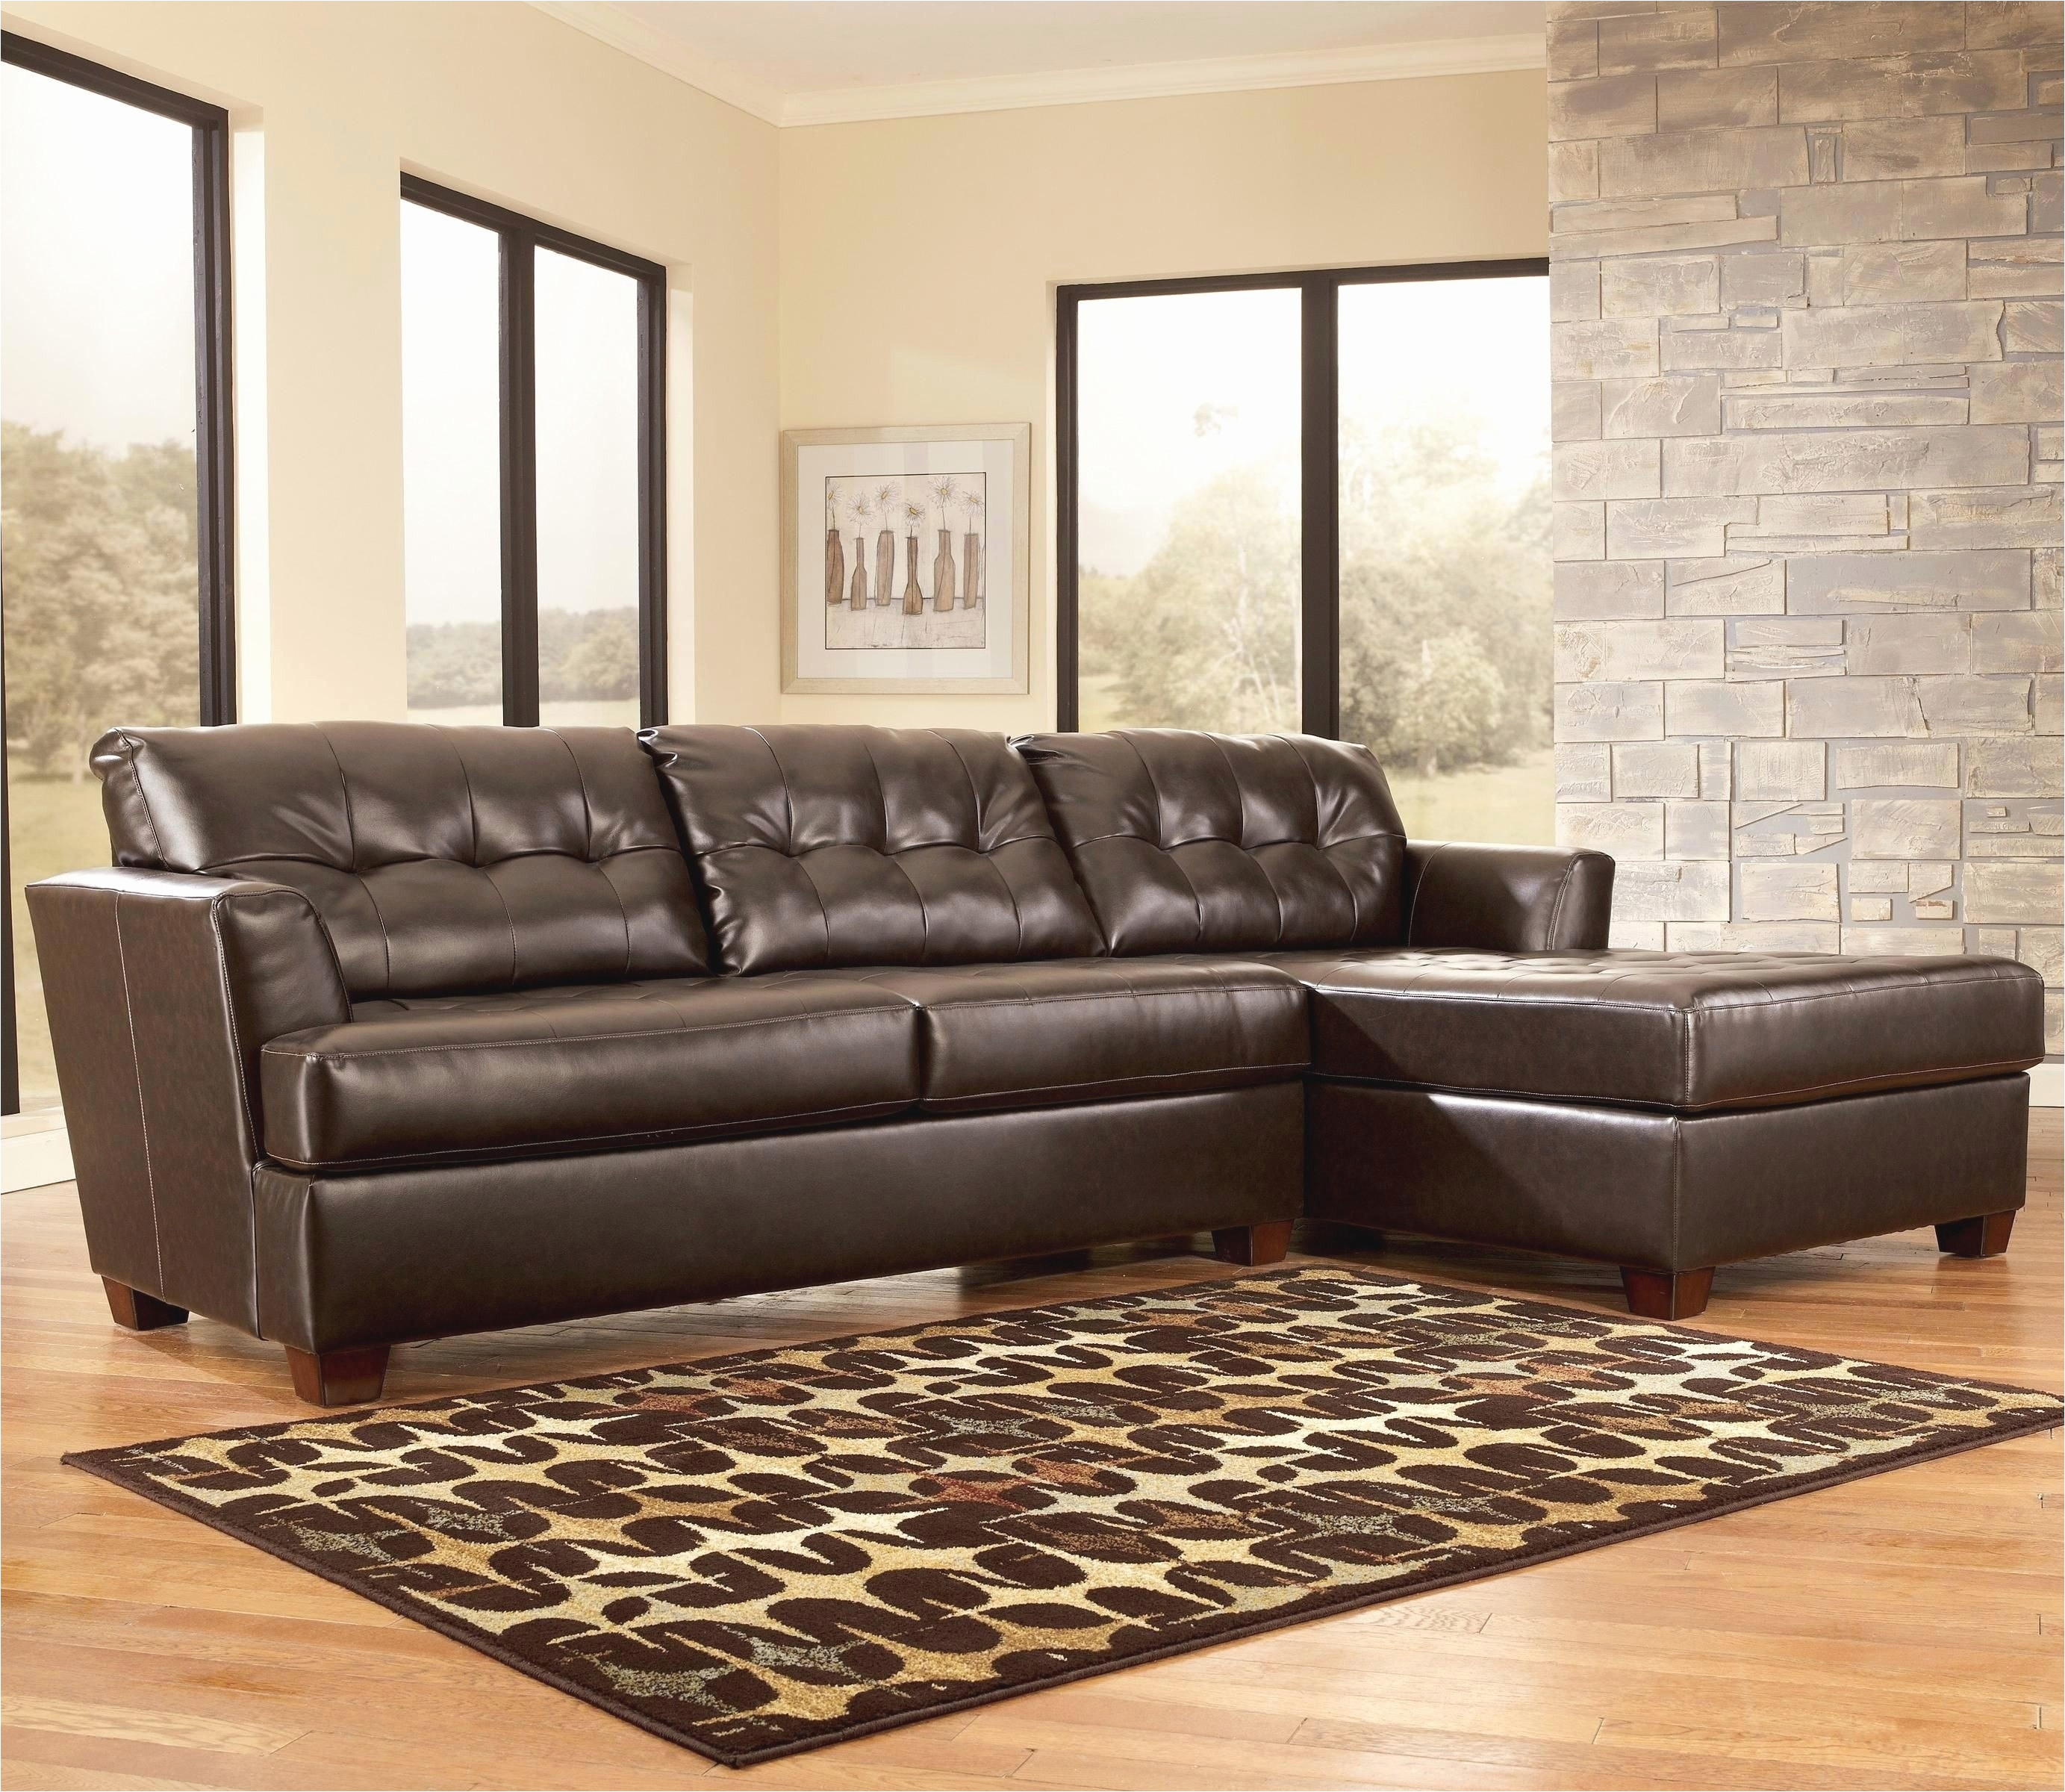 pensacola furniture stores ashley furniture florida locations collection furniture of